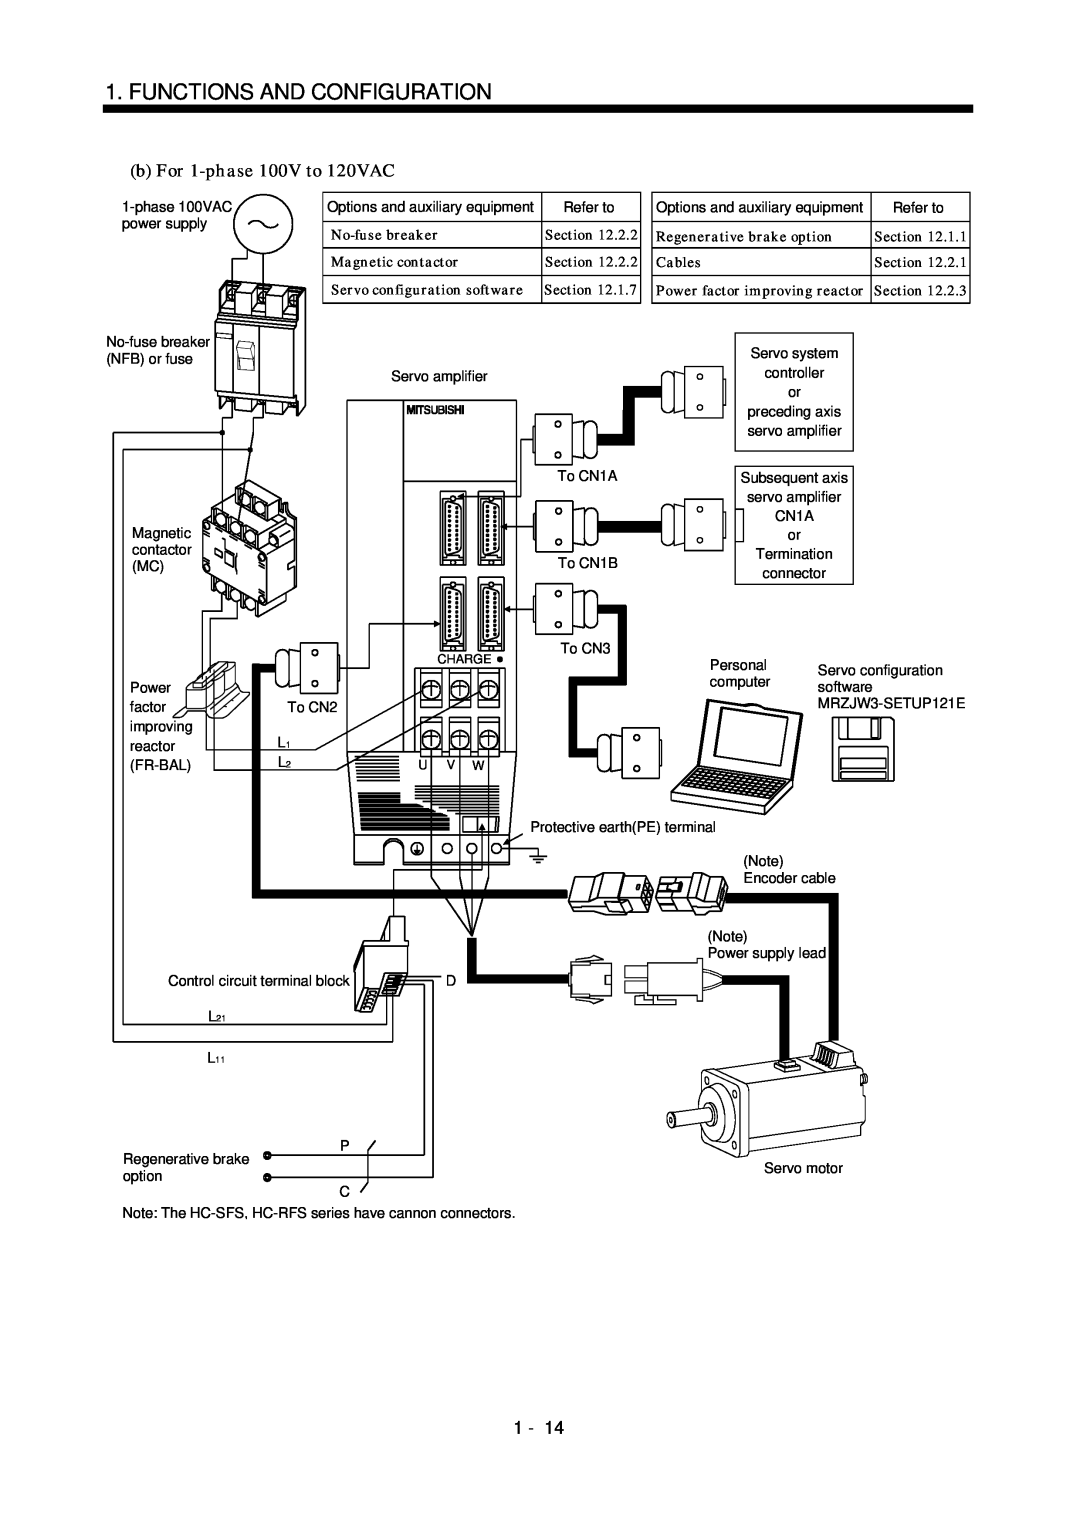 Bose MR-J2S- B instruction manual Functions And Configuration, b For 1-phase100V to 120VAC 